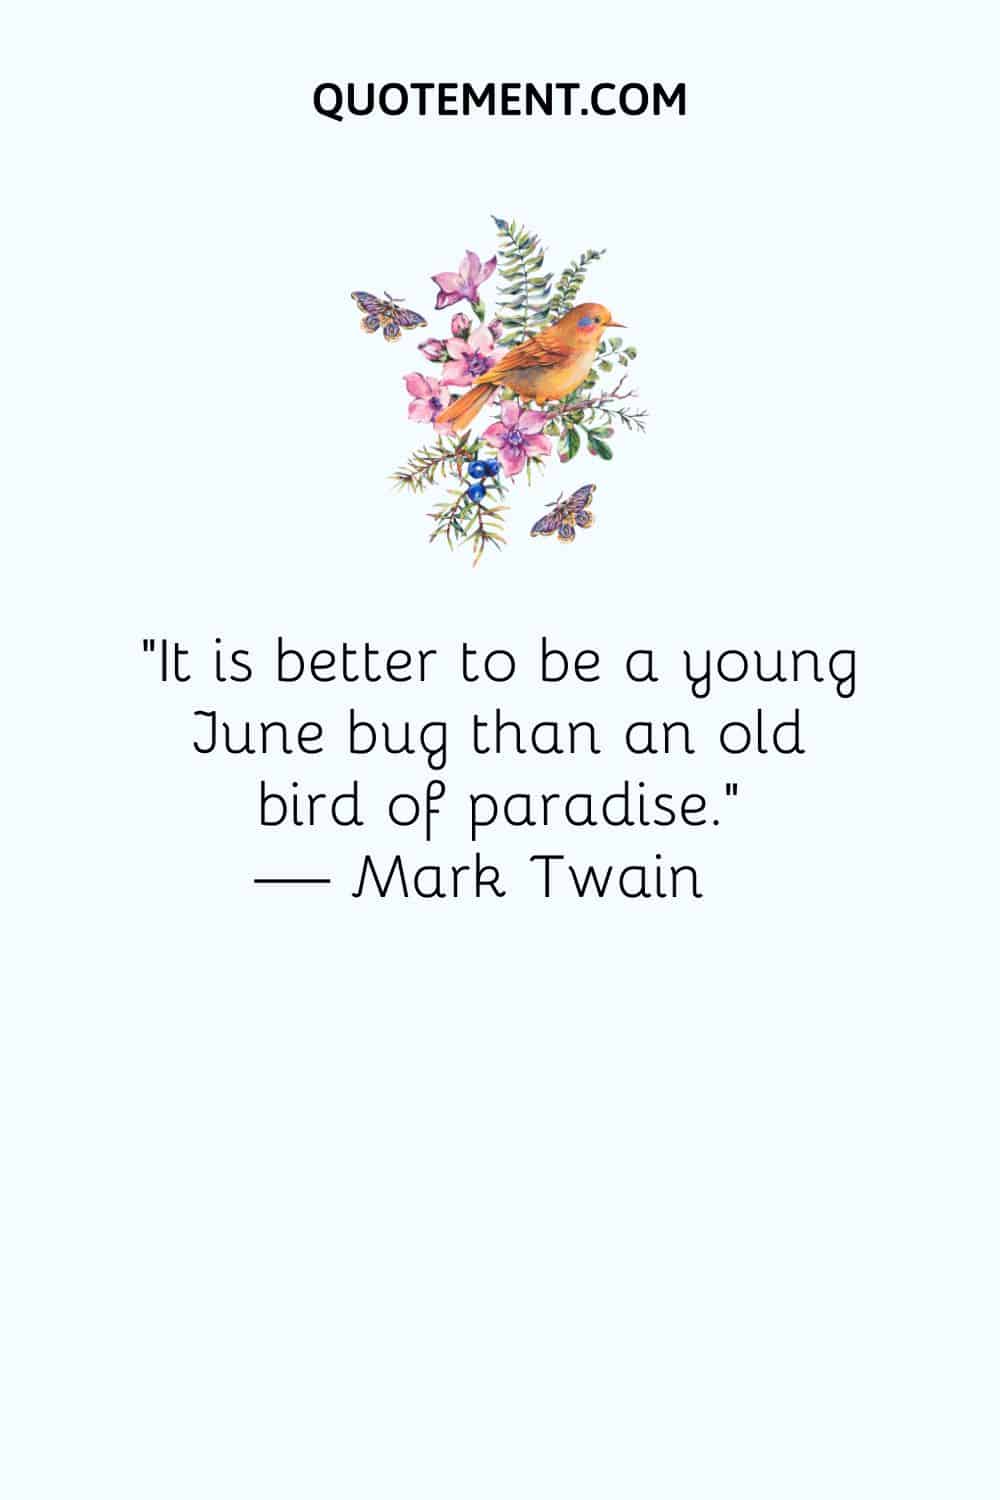 image of a bird, flowers, and butterflies representing June inspirational quote